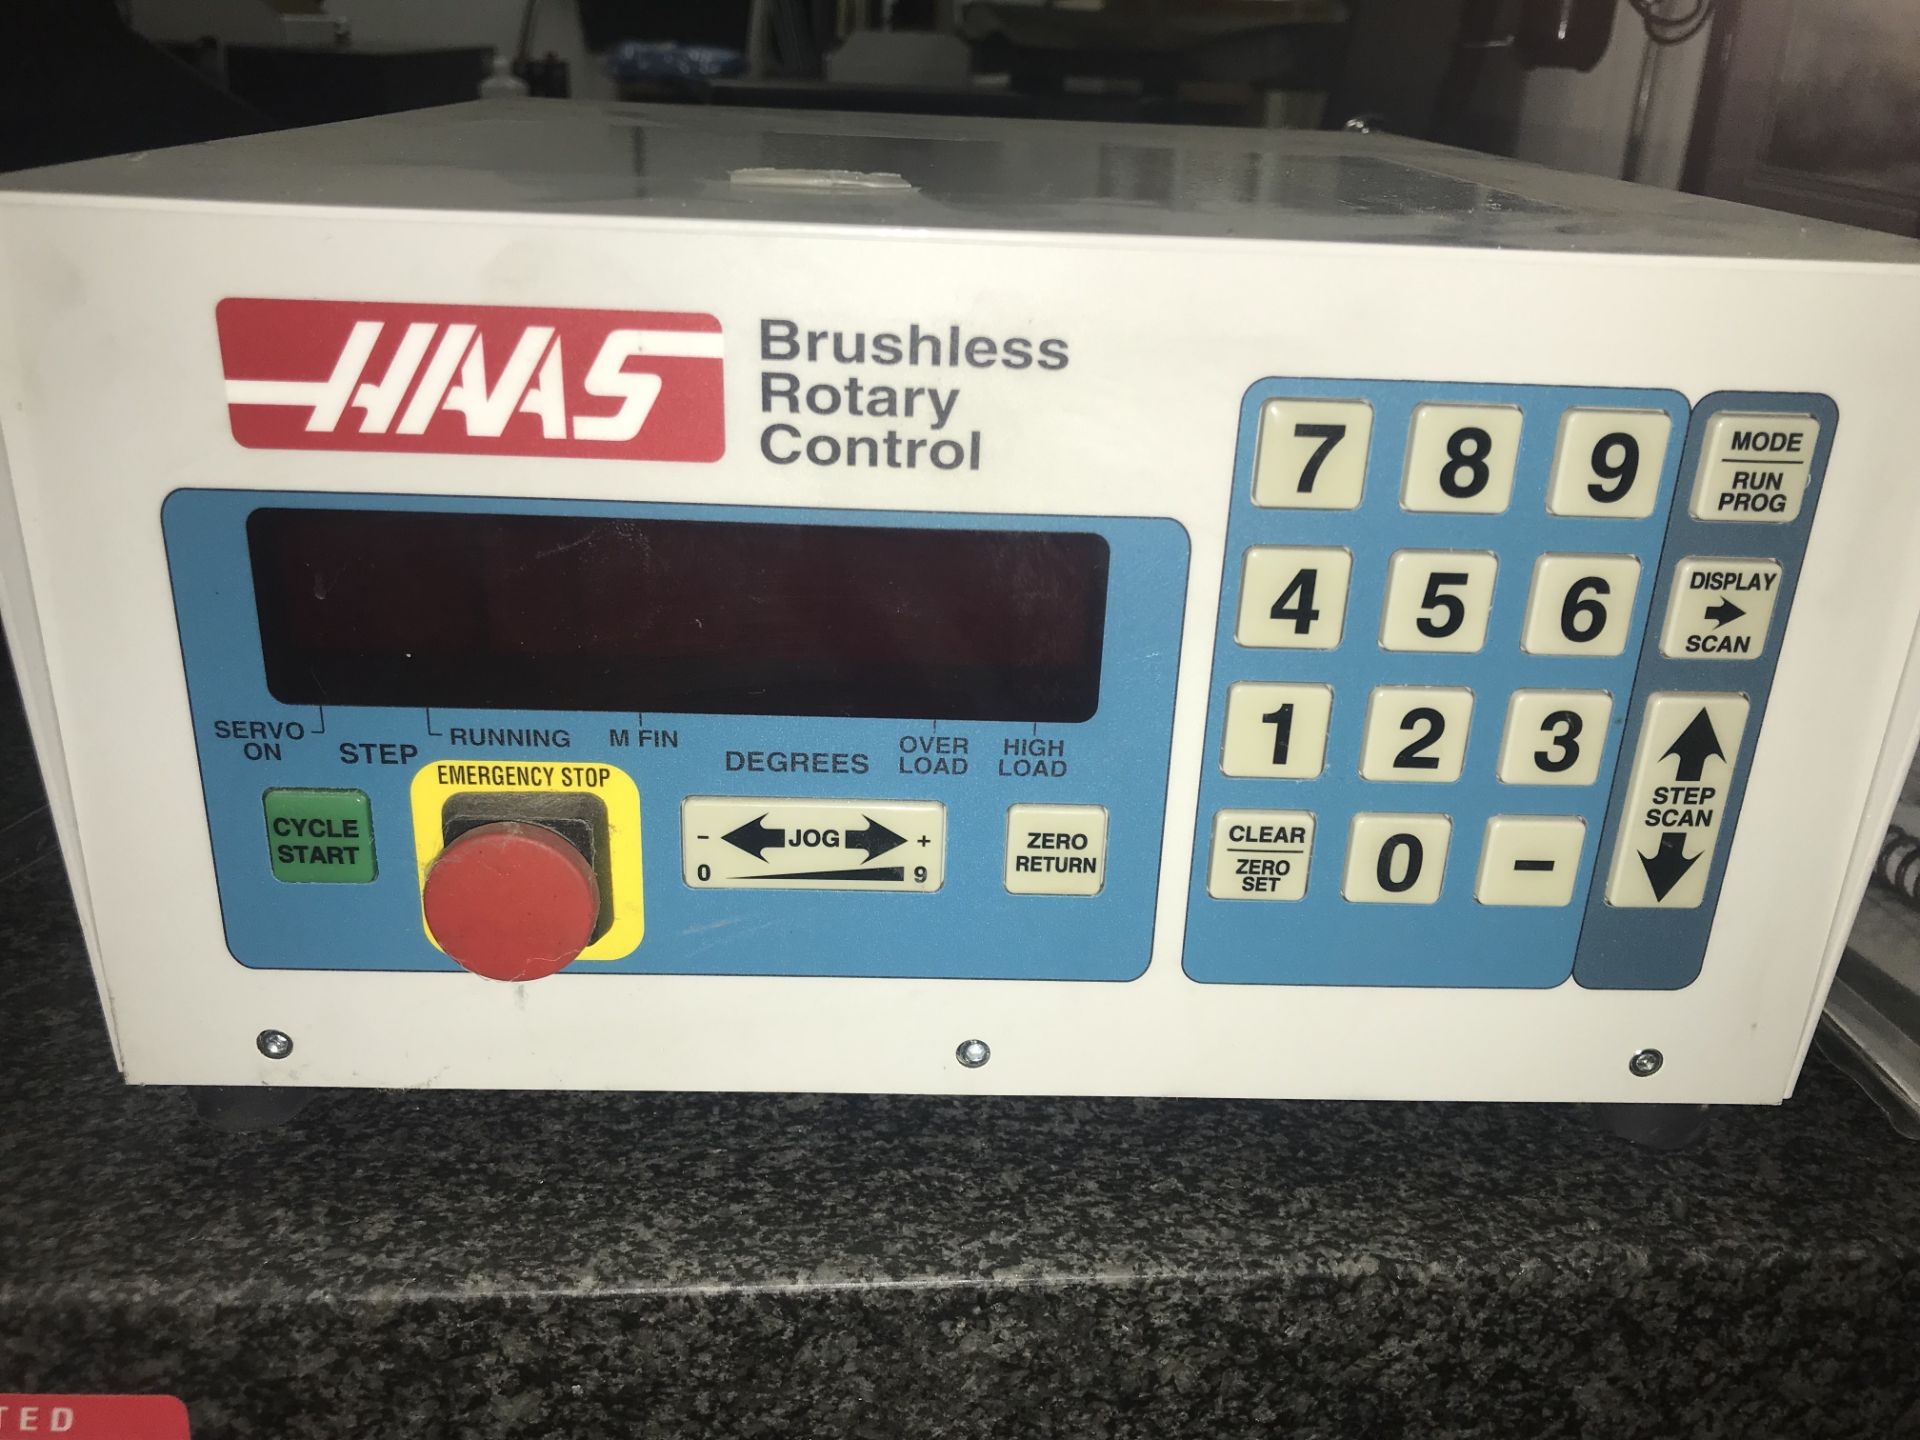 HAAS BRUSHLESS ROTARY CONTROL, NEVER USED, SN: 8020980 - Image 2 of 4